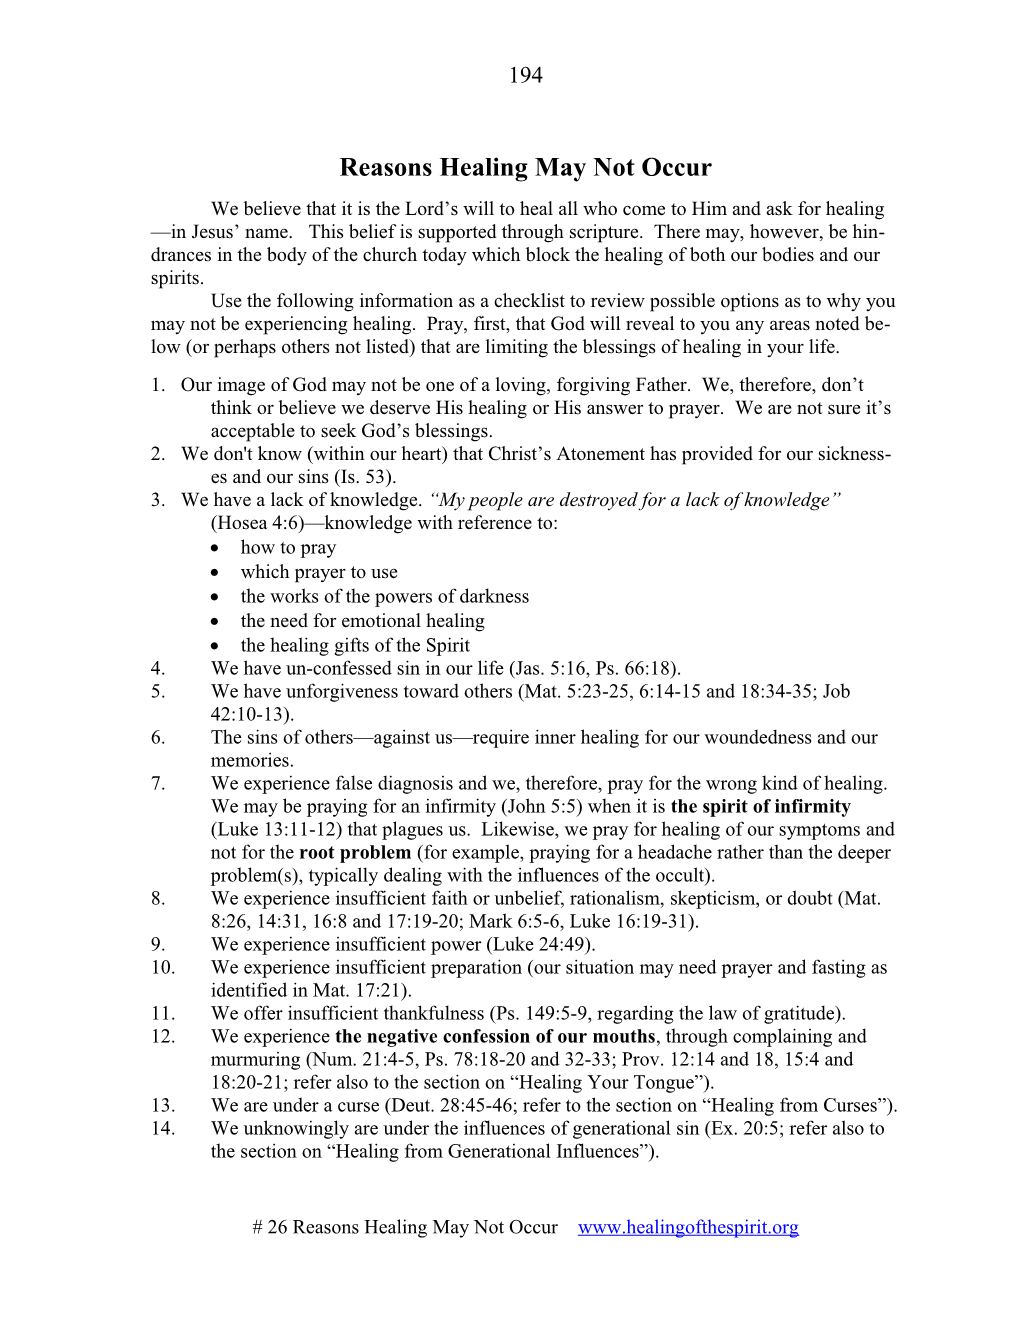 Reasons Healing May Not Occur